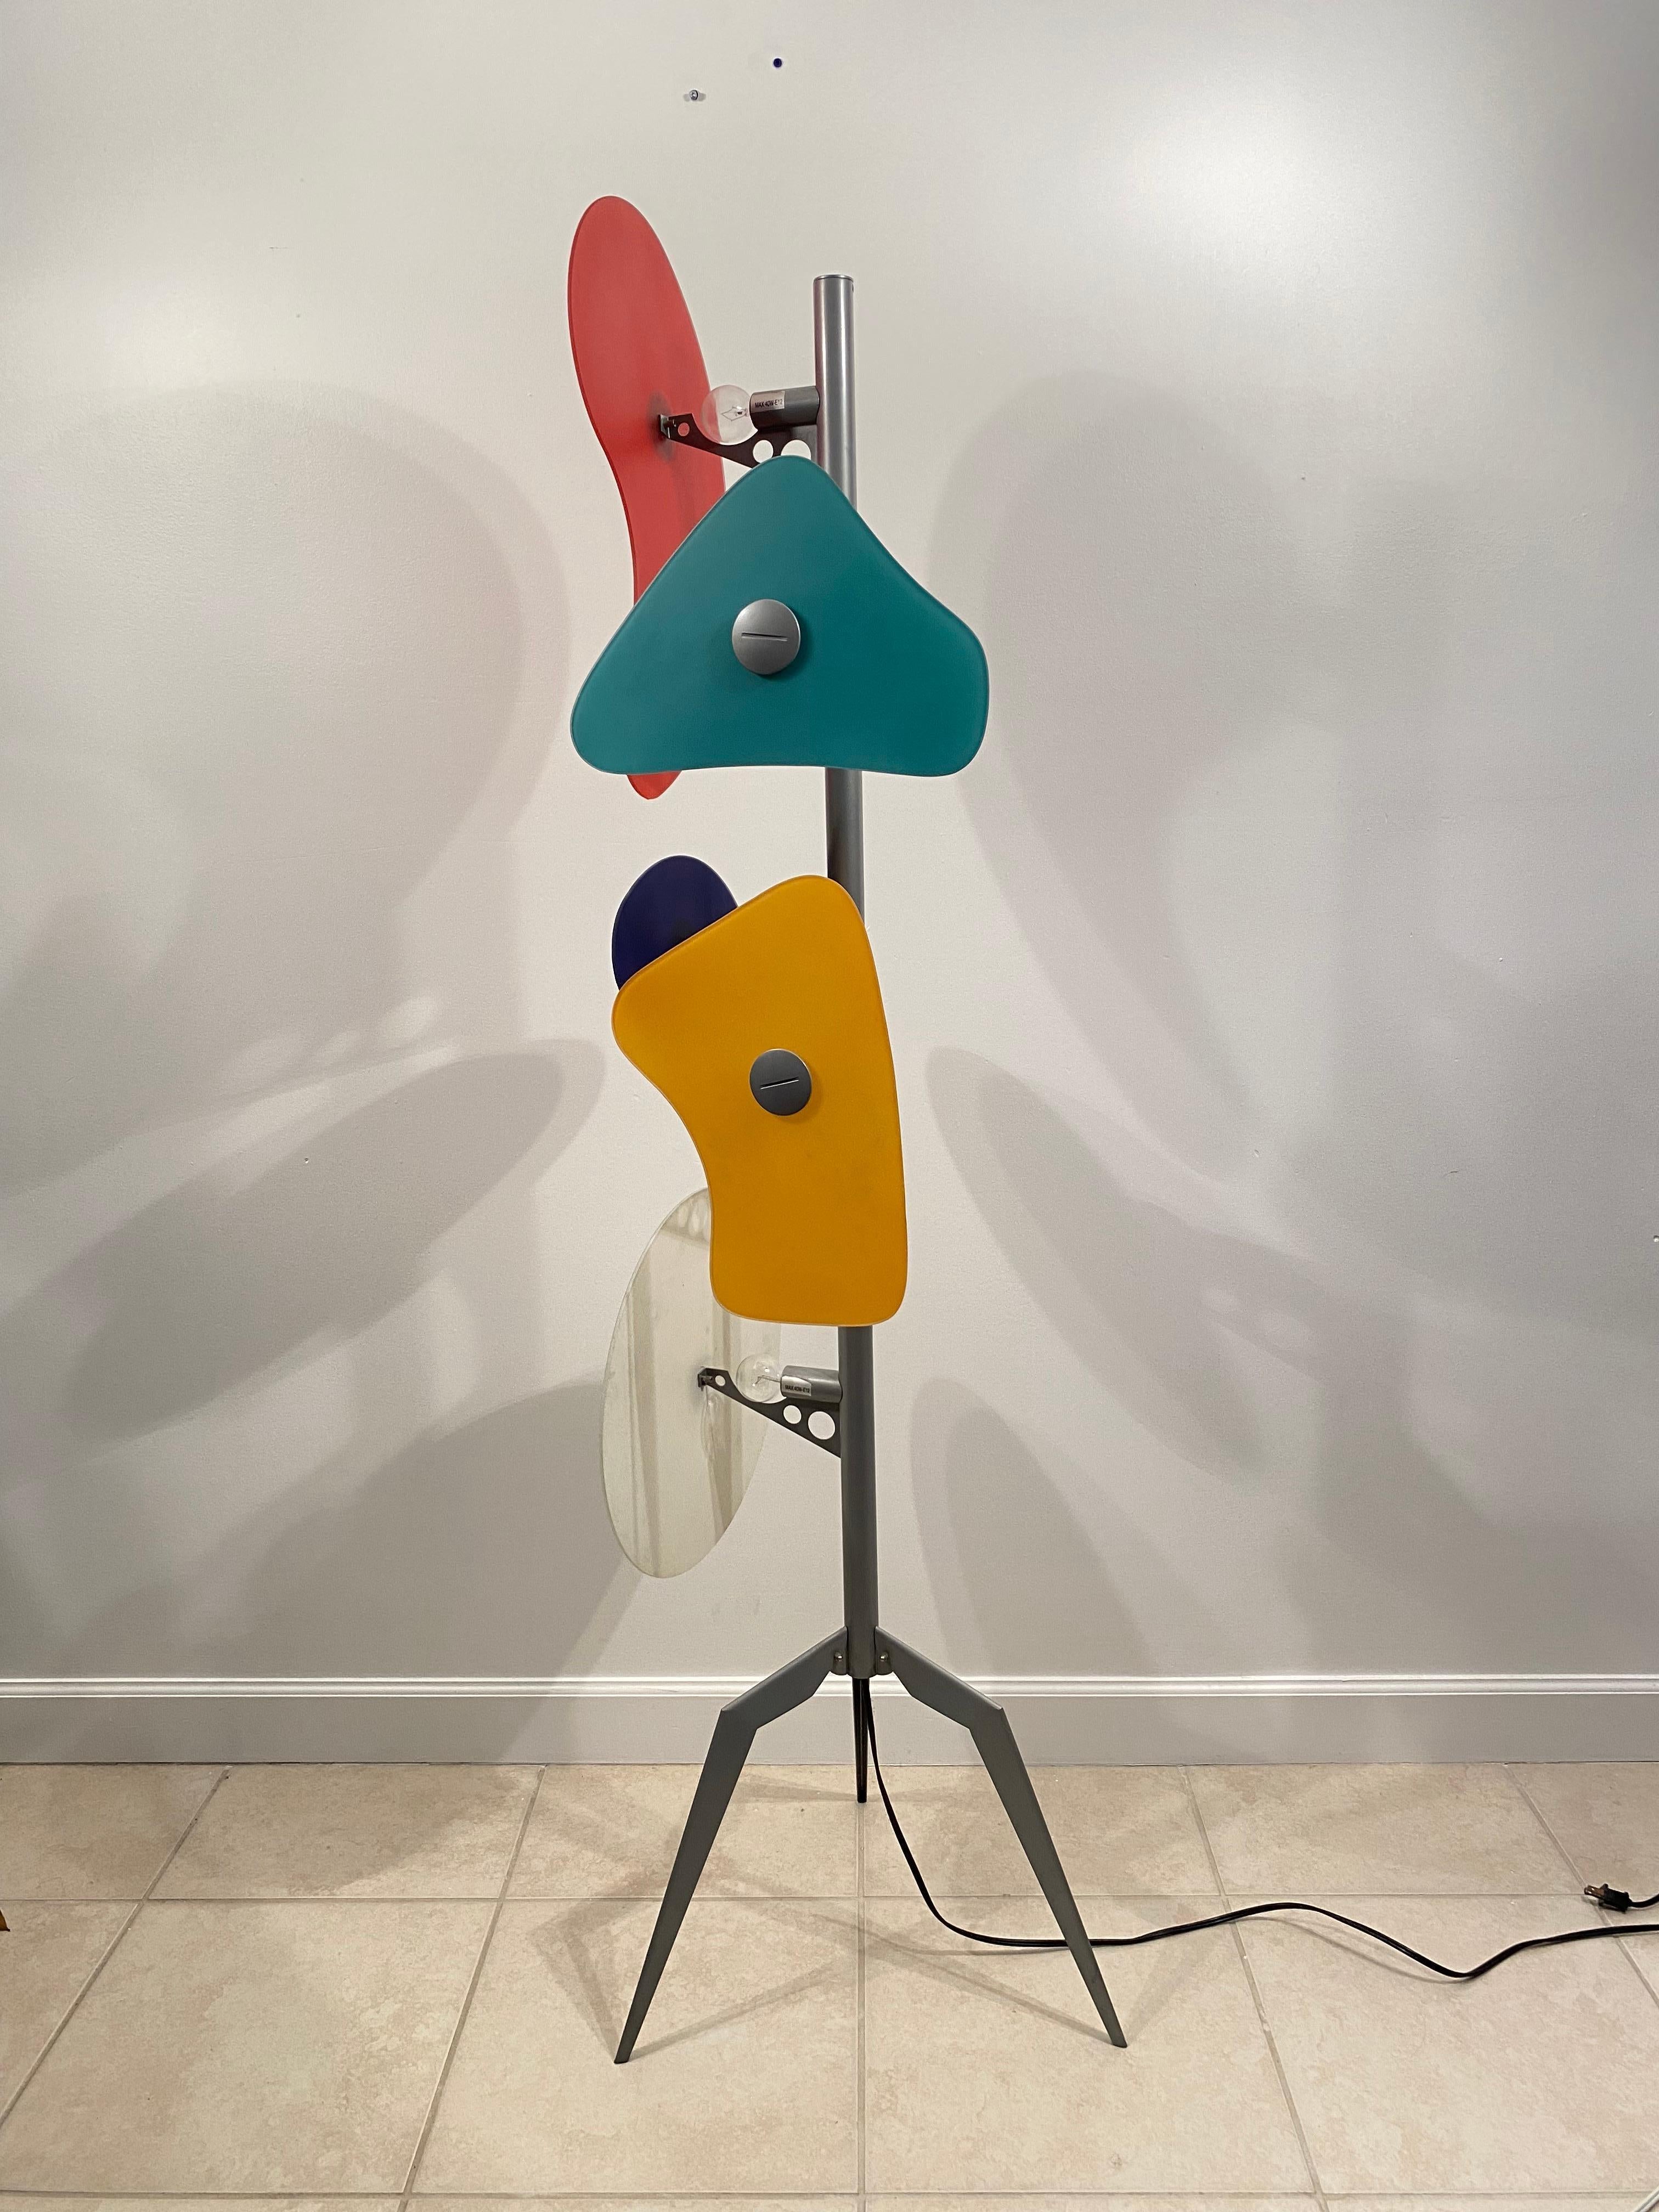 Orbital Floor Lamp consisting of 5 backlit multi-color glass shapes with large screws attached to a gray lacquered metal base.  The Orbital Floor Lamp was designed in 1992 by Ferruccio Laviani and manufactured by Foscarini.